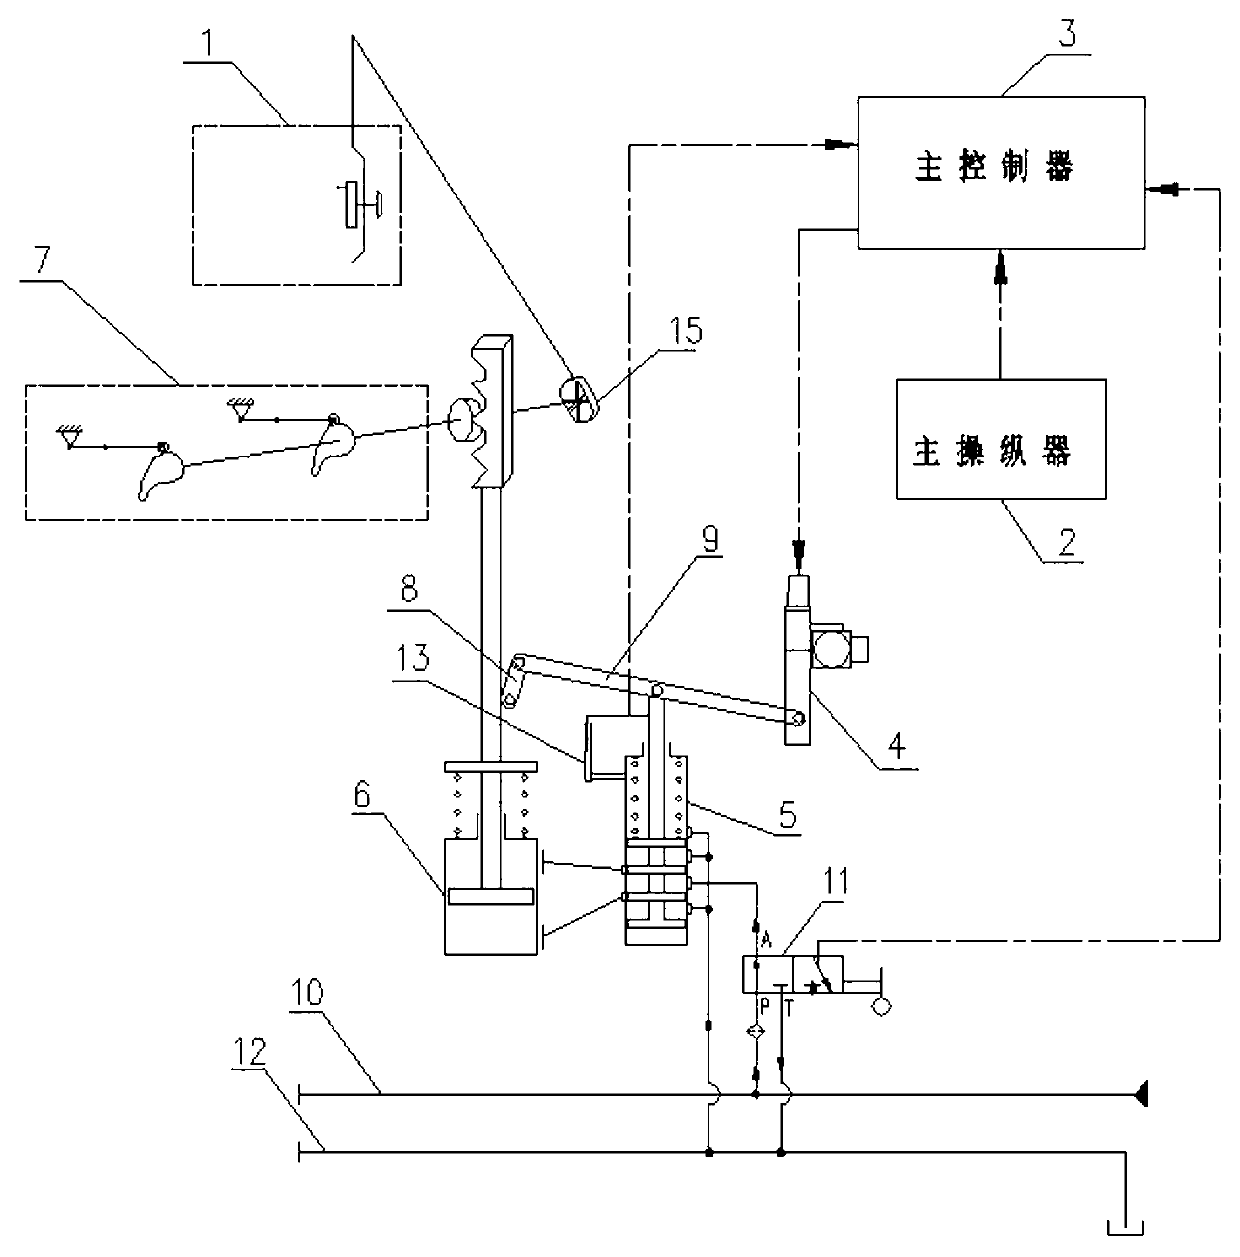 Non-disturbance ship main steam turbine control switchover system and switchover method